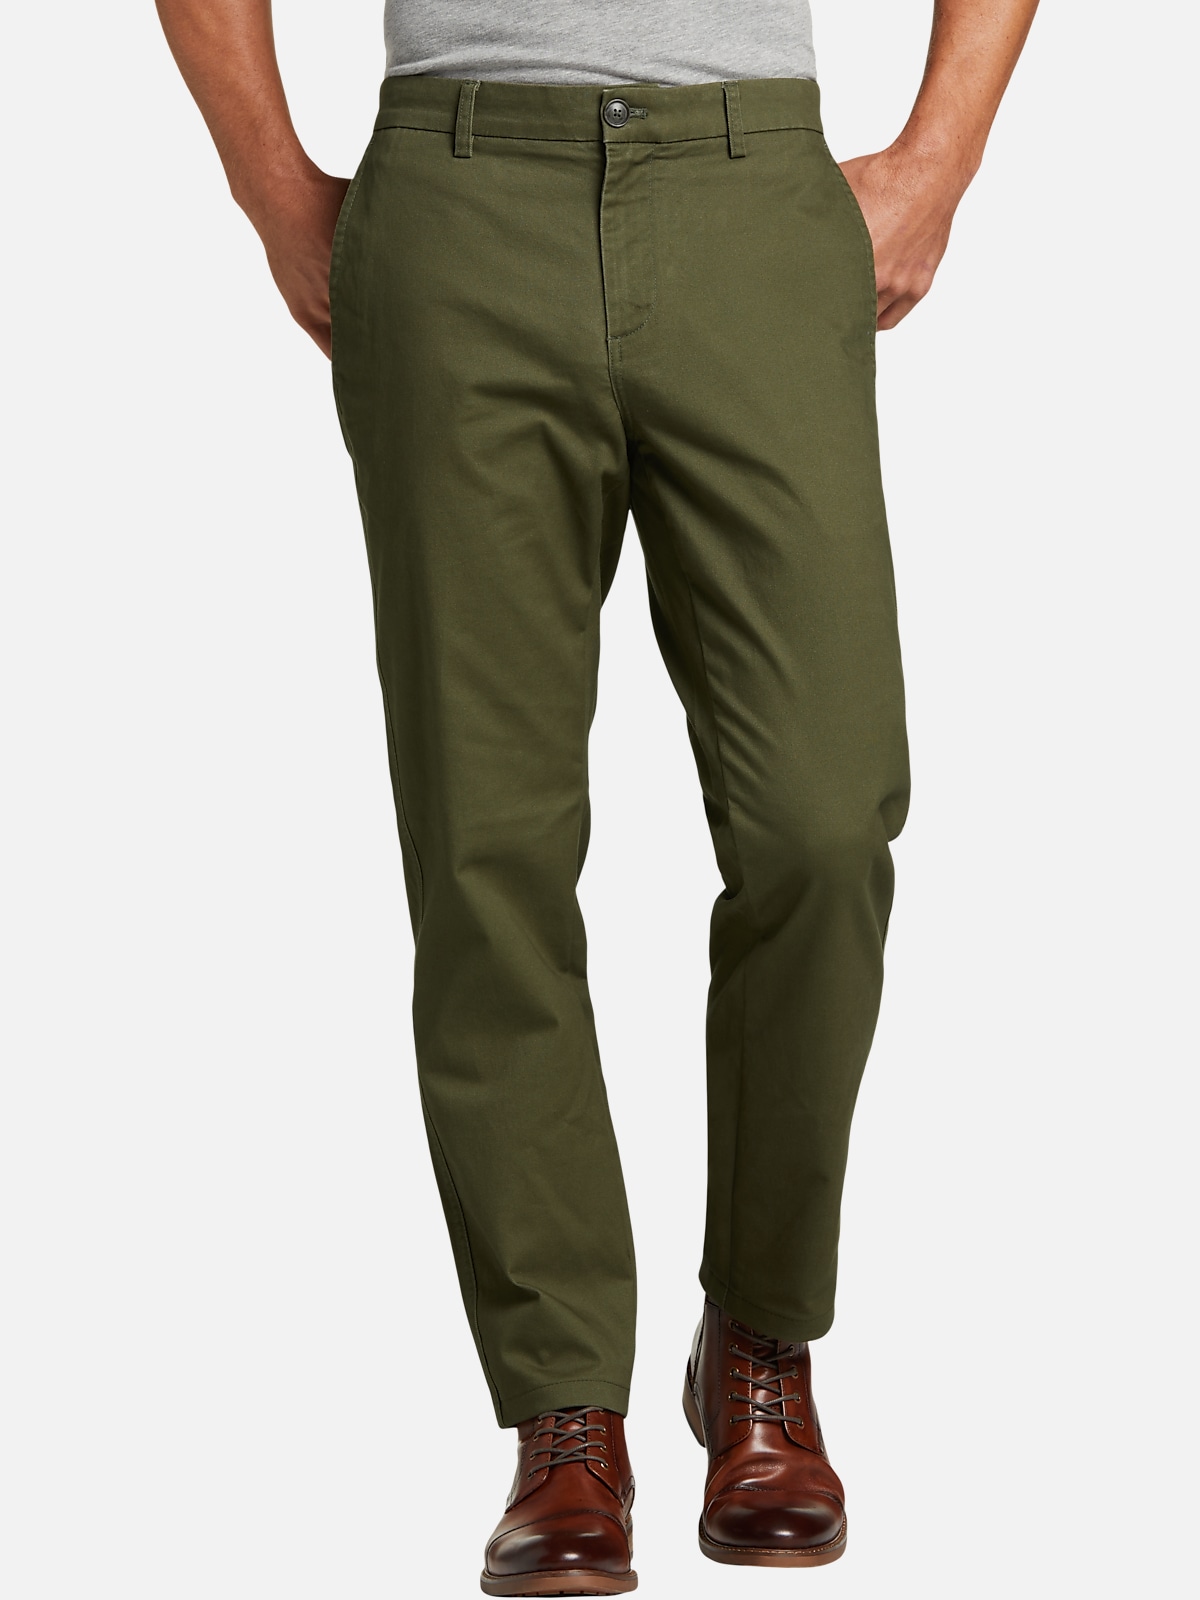 Joseph Abboud Modern Fit Chinos | All Clearance $39.99| Men's Wearhouse